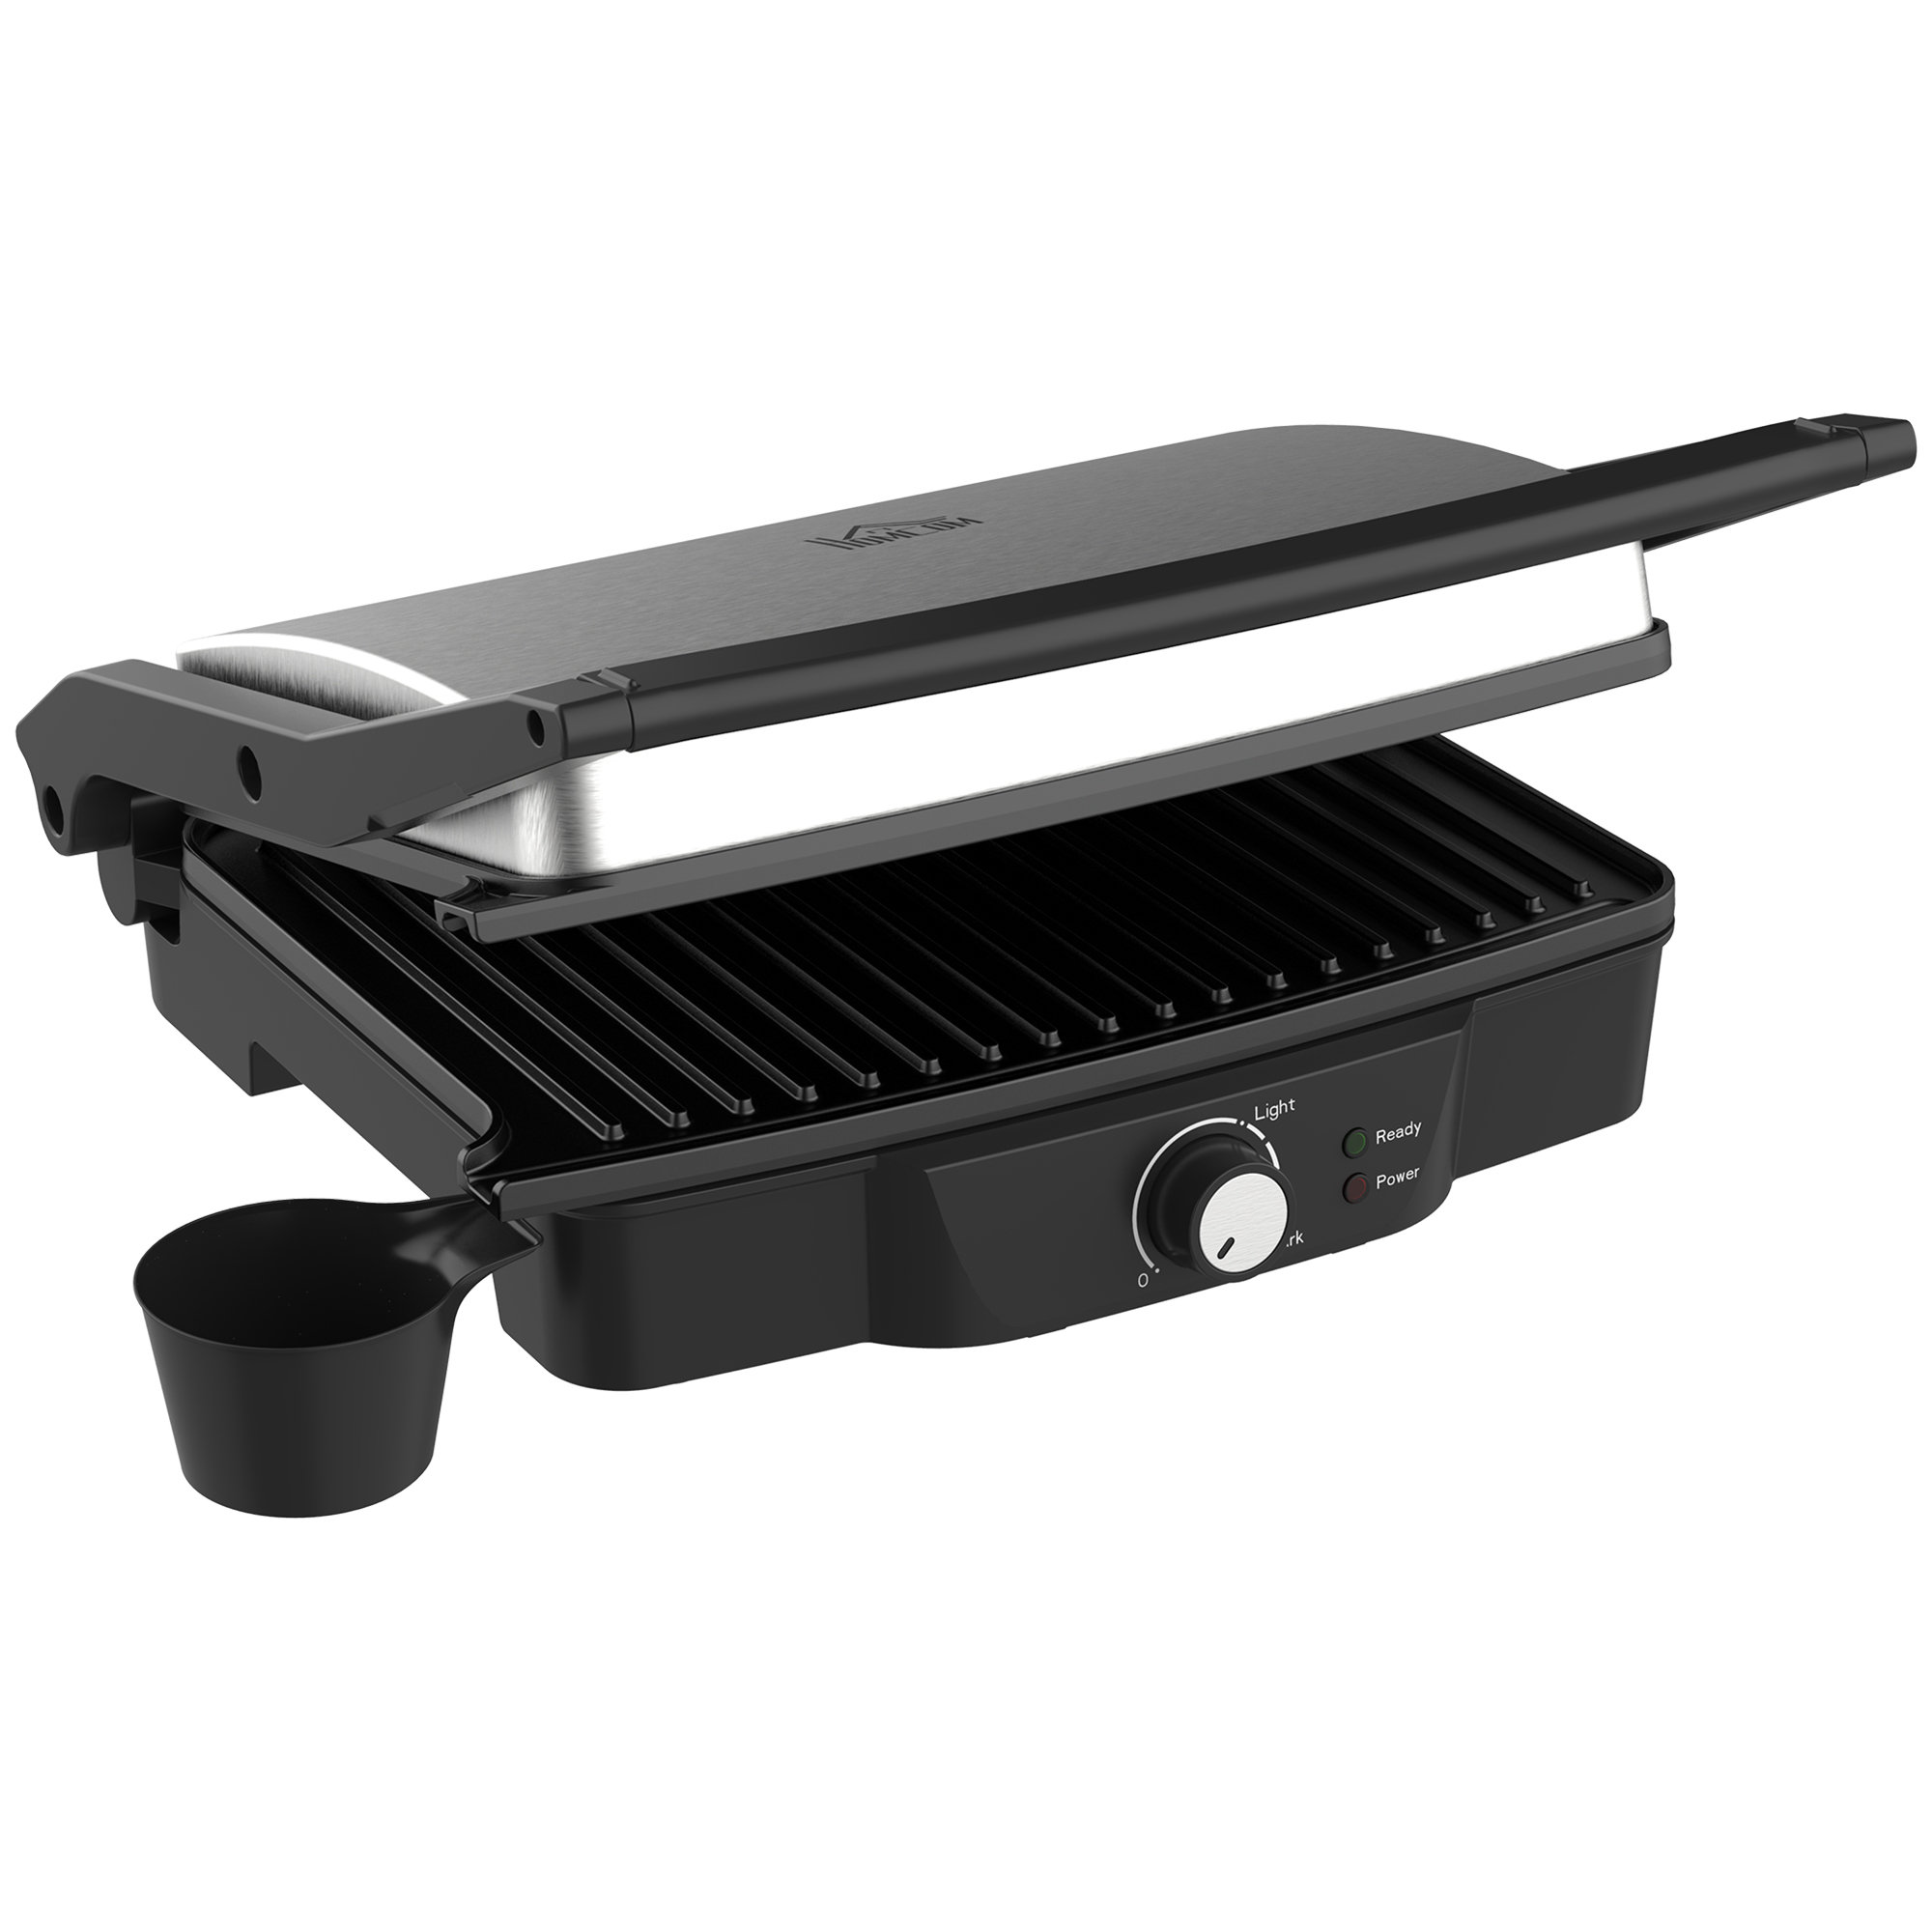 Hamilton Beach Searing Grill 118 in. Stainless Steel Indoor Grill with Non-Stick Plates, Silver